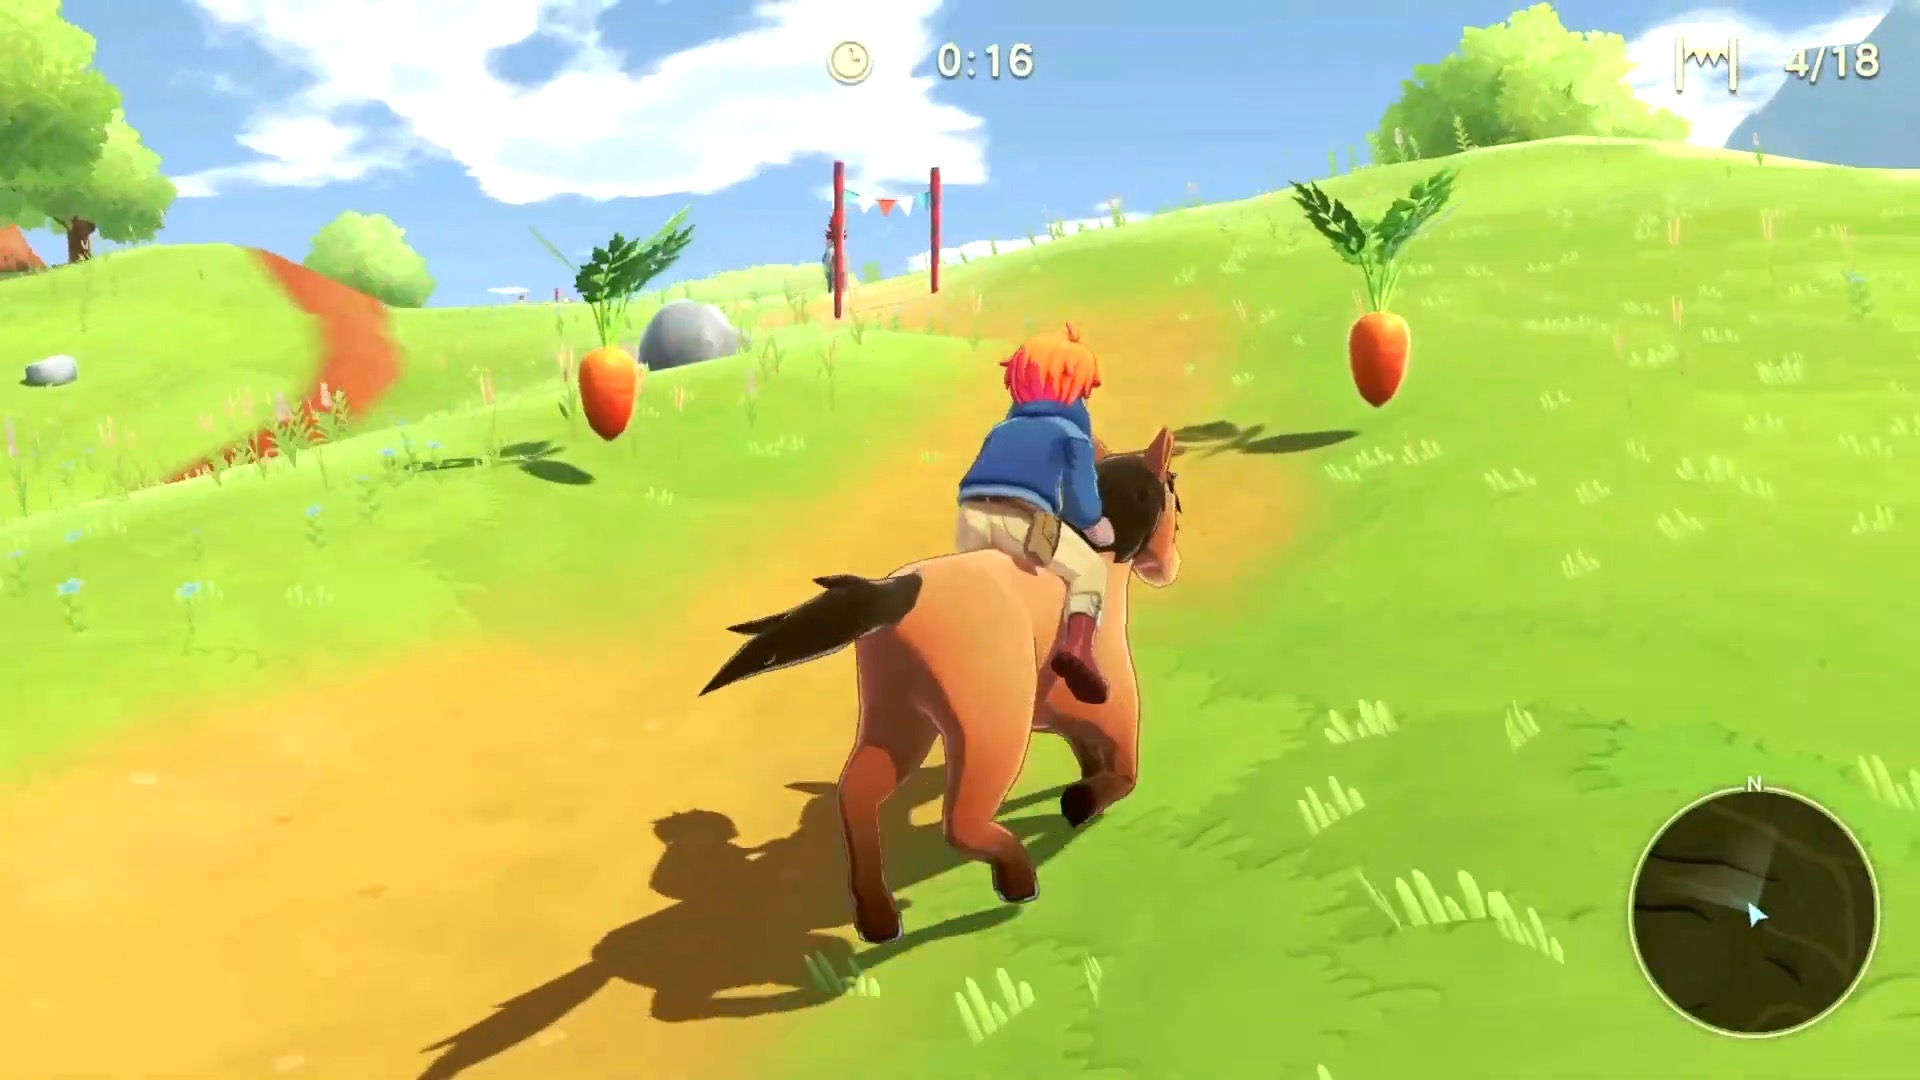 Harvest Moon The Winds of Anthos: veja gameplay e requisitos do simulador